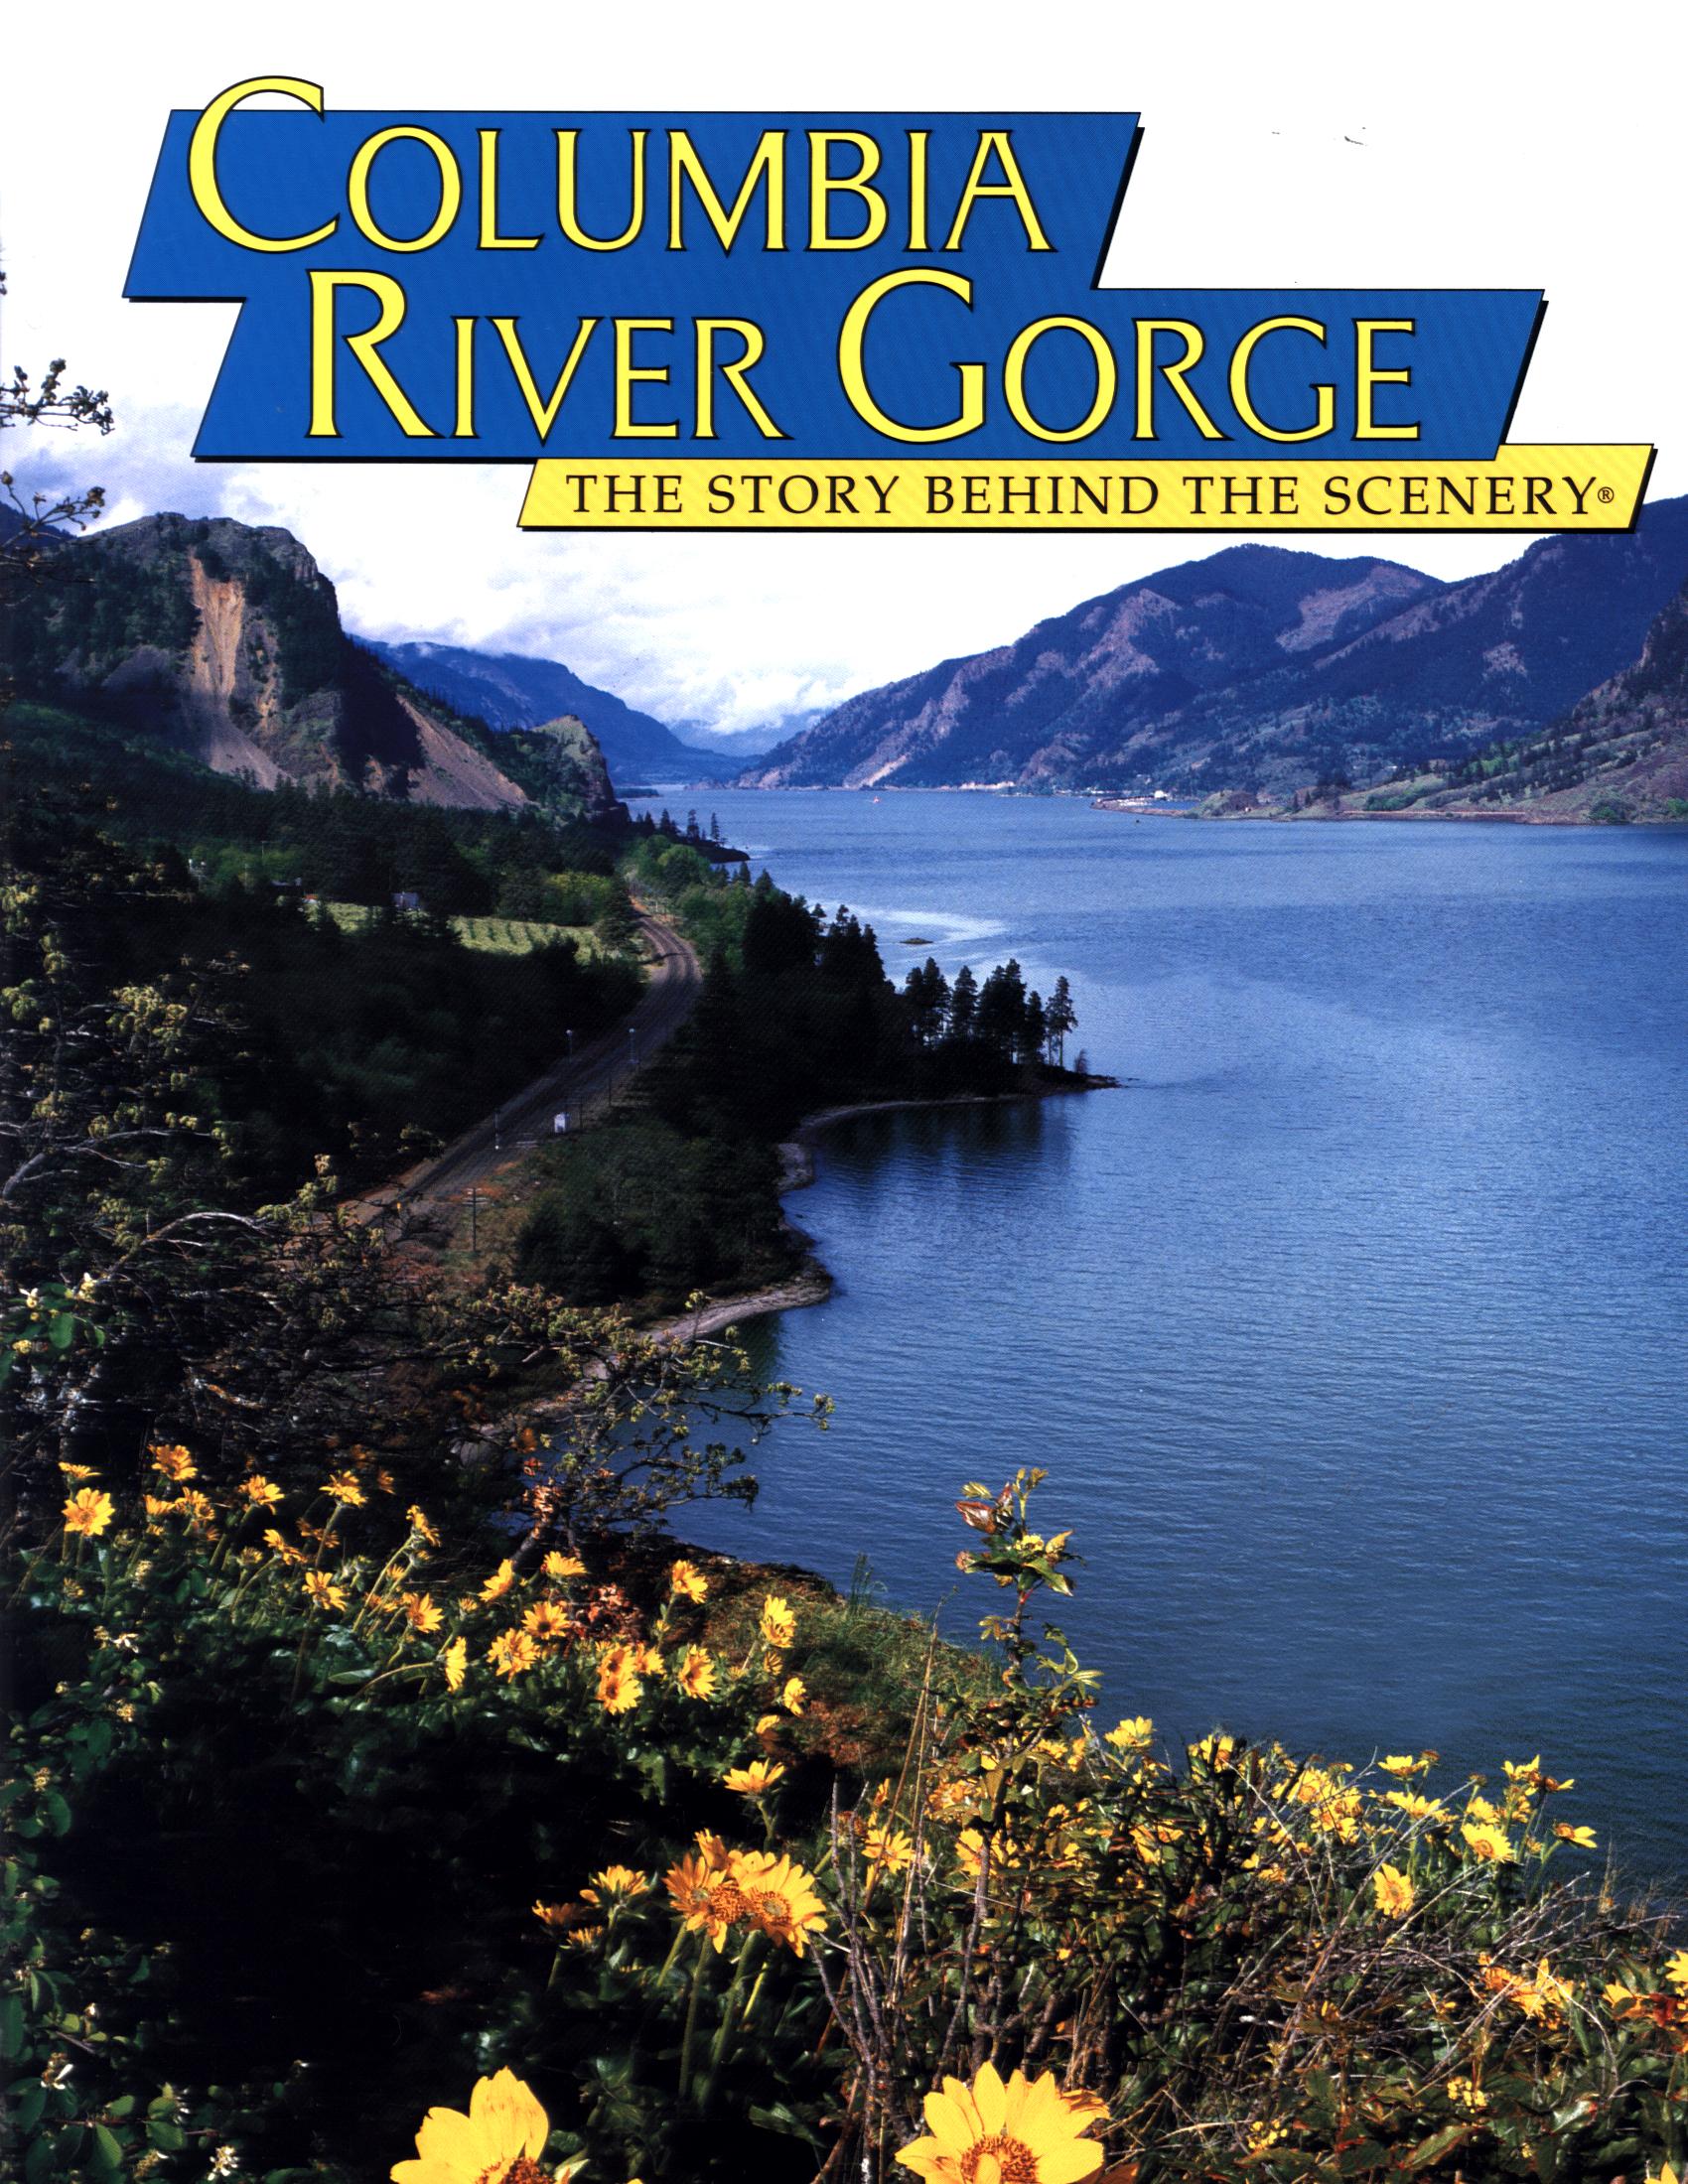 COLUMBIA RIVER GORGE: the story behind the scenery (WA/OR).